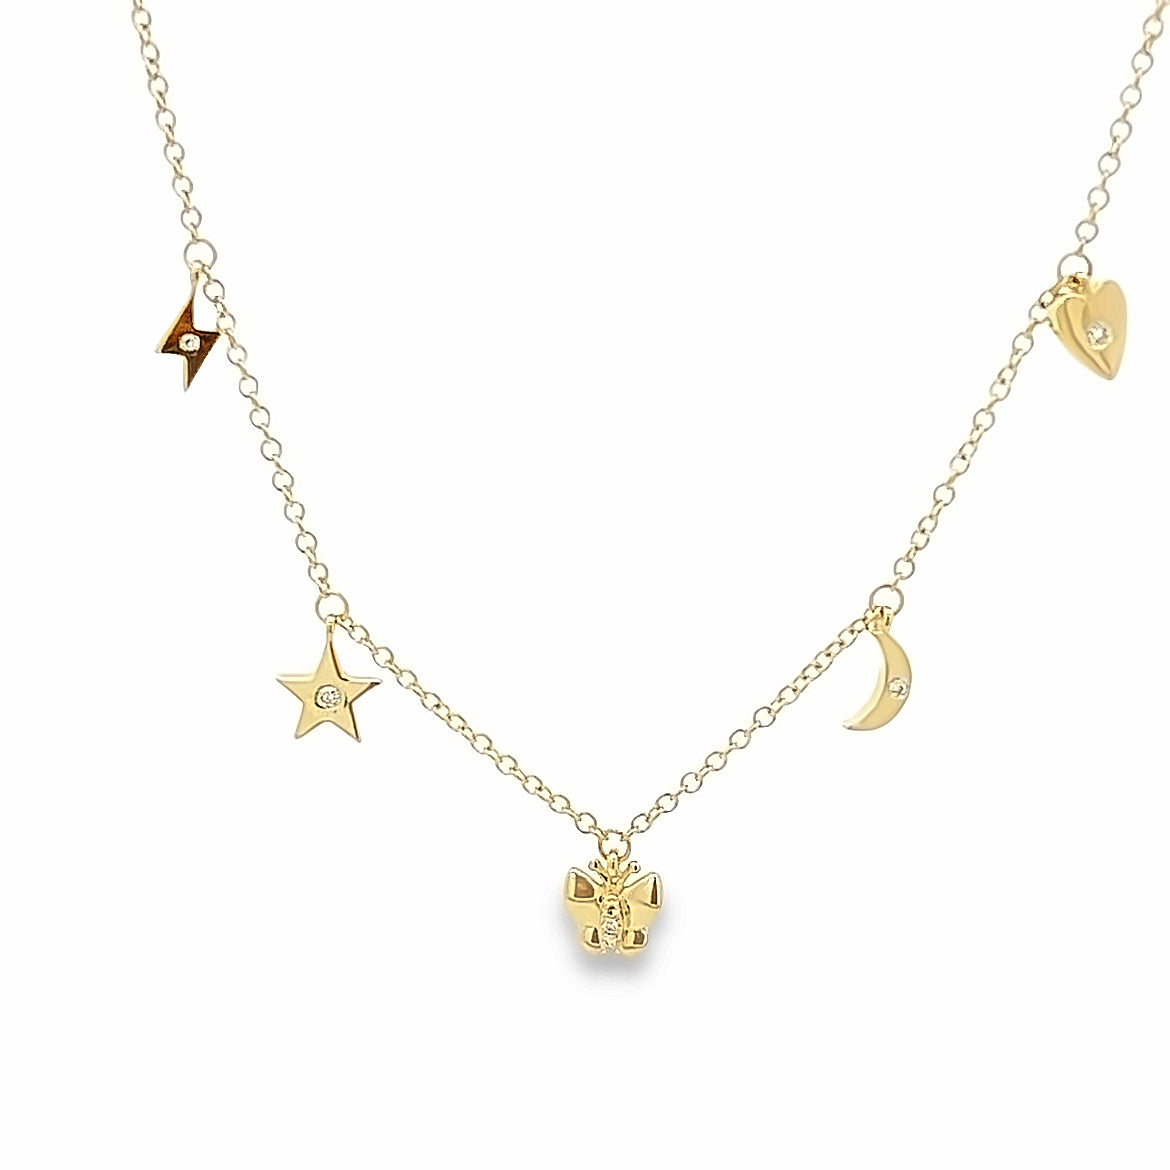 14K GOLD MULTI CHARMS NECKLACE